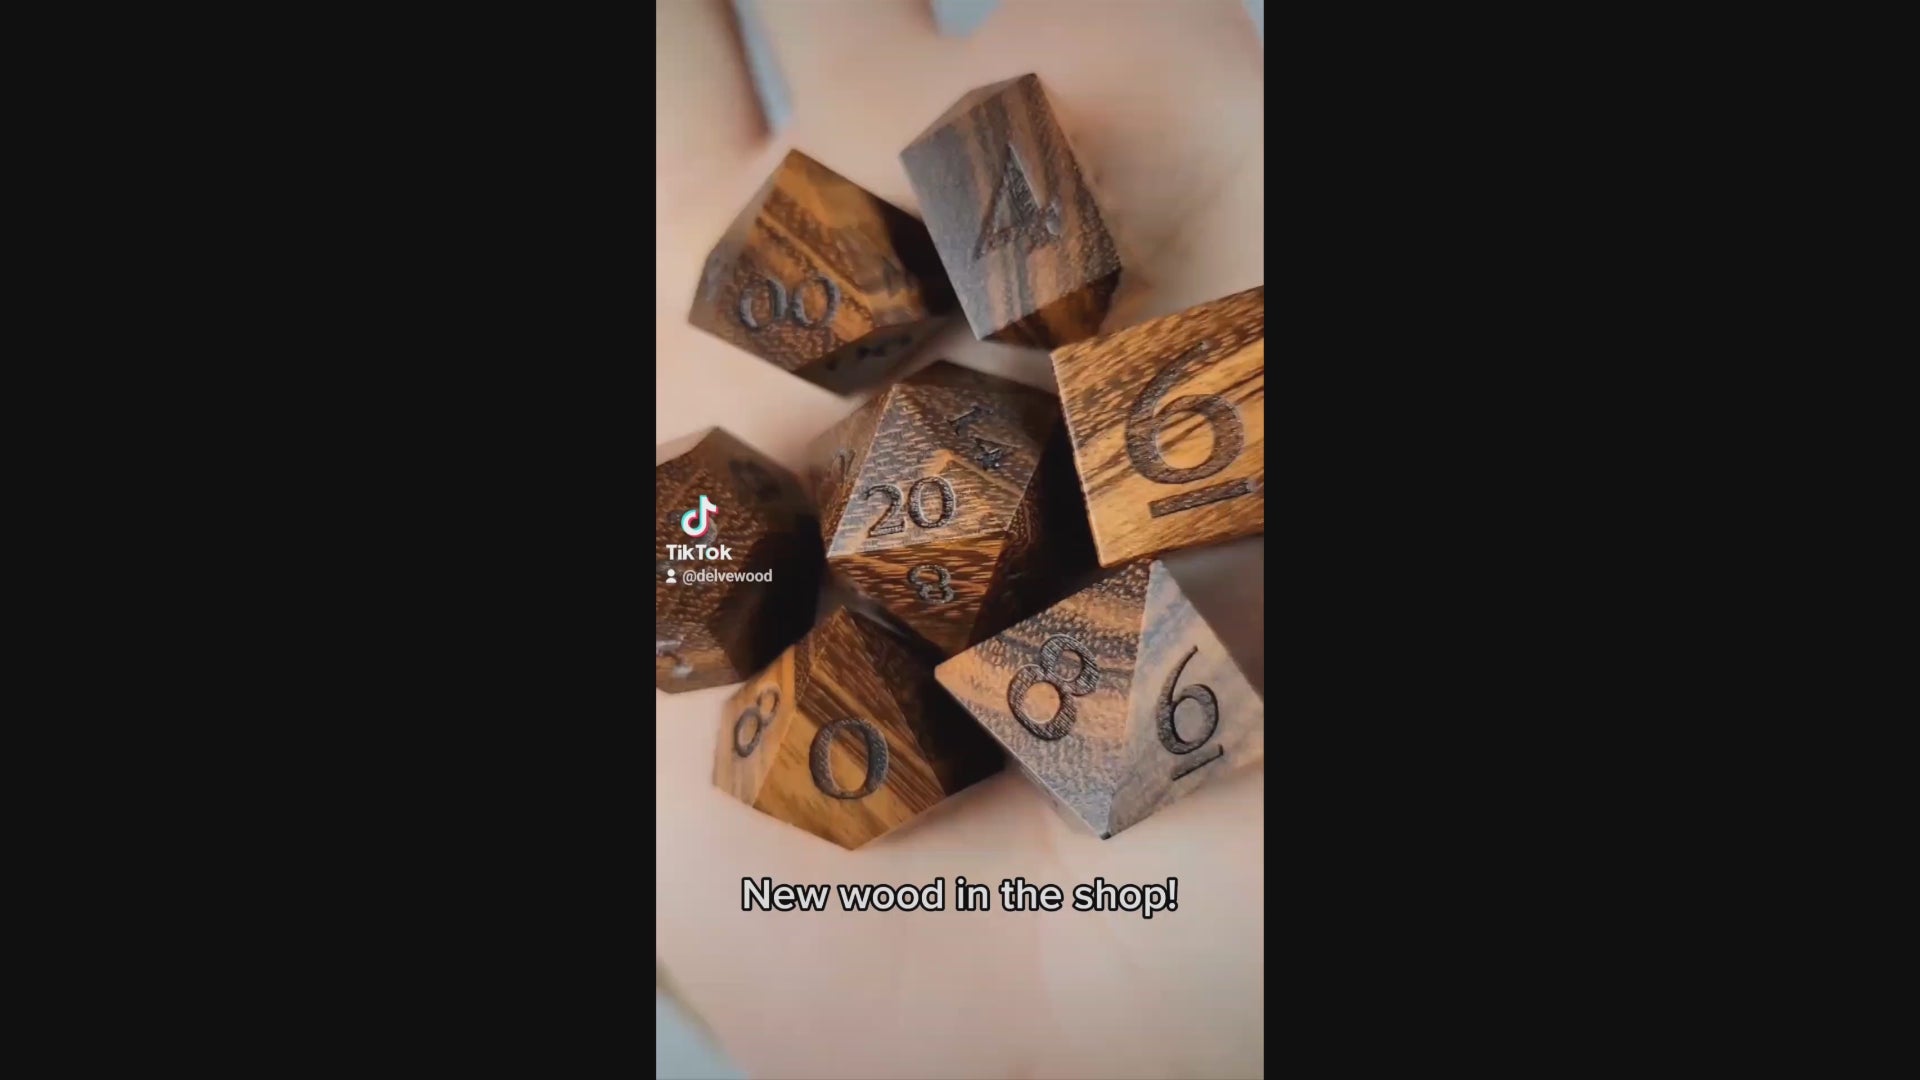 Quebracho dice set being rolled into a Delver's kit dice box and tray for Dungeons & Dragons rpg tabletop roleplaying game.